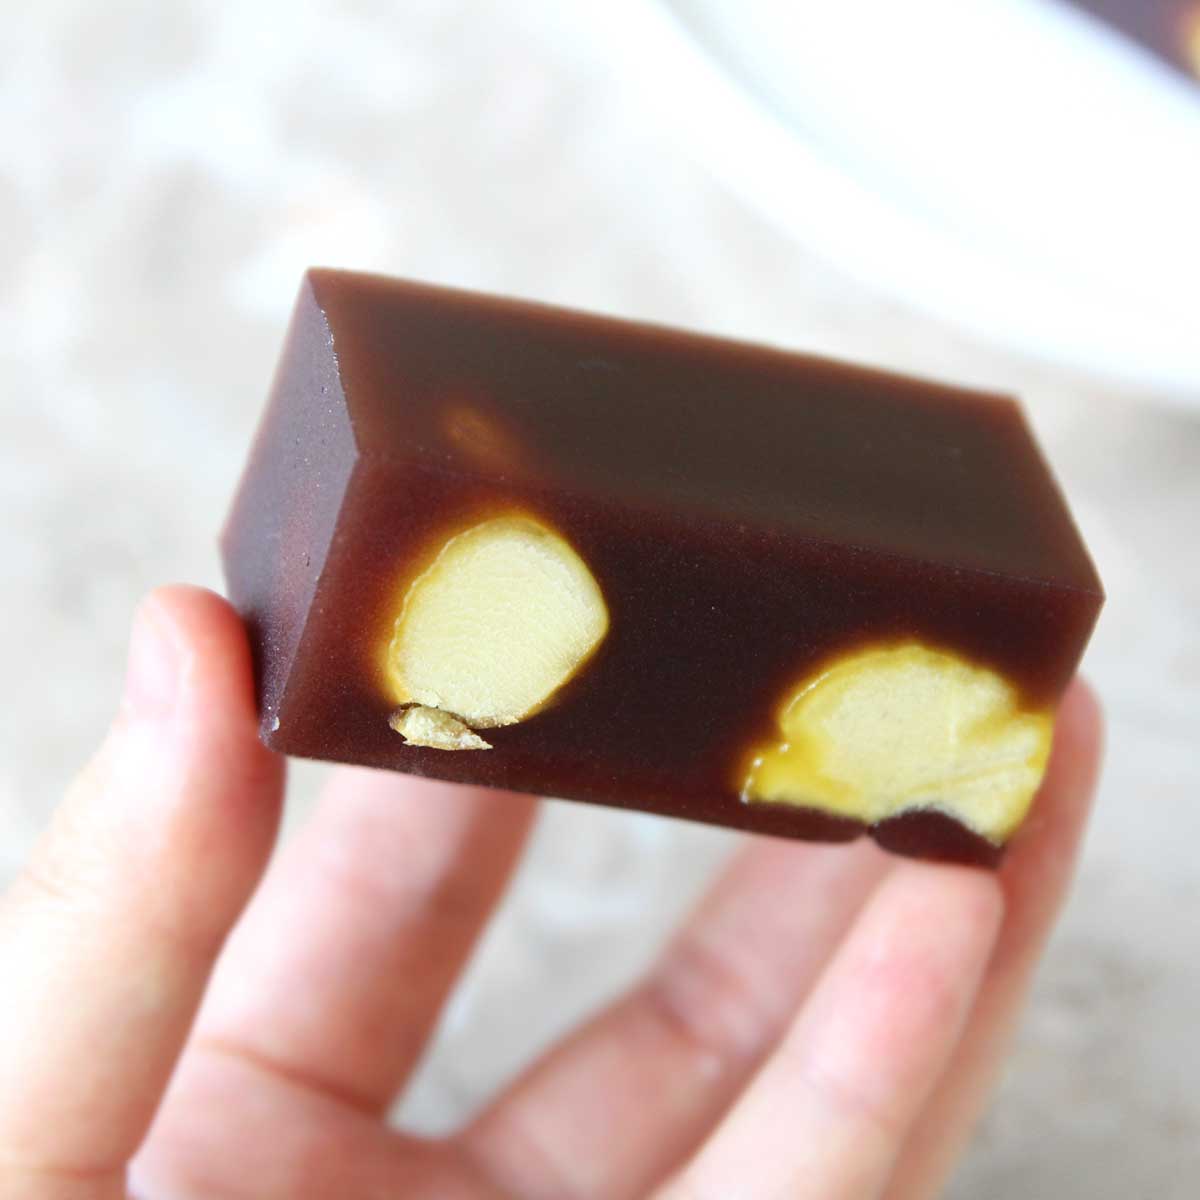 How to Make the Japanese Wagashi - Neri Yokan with Chestnuts - birthday cake protein bars